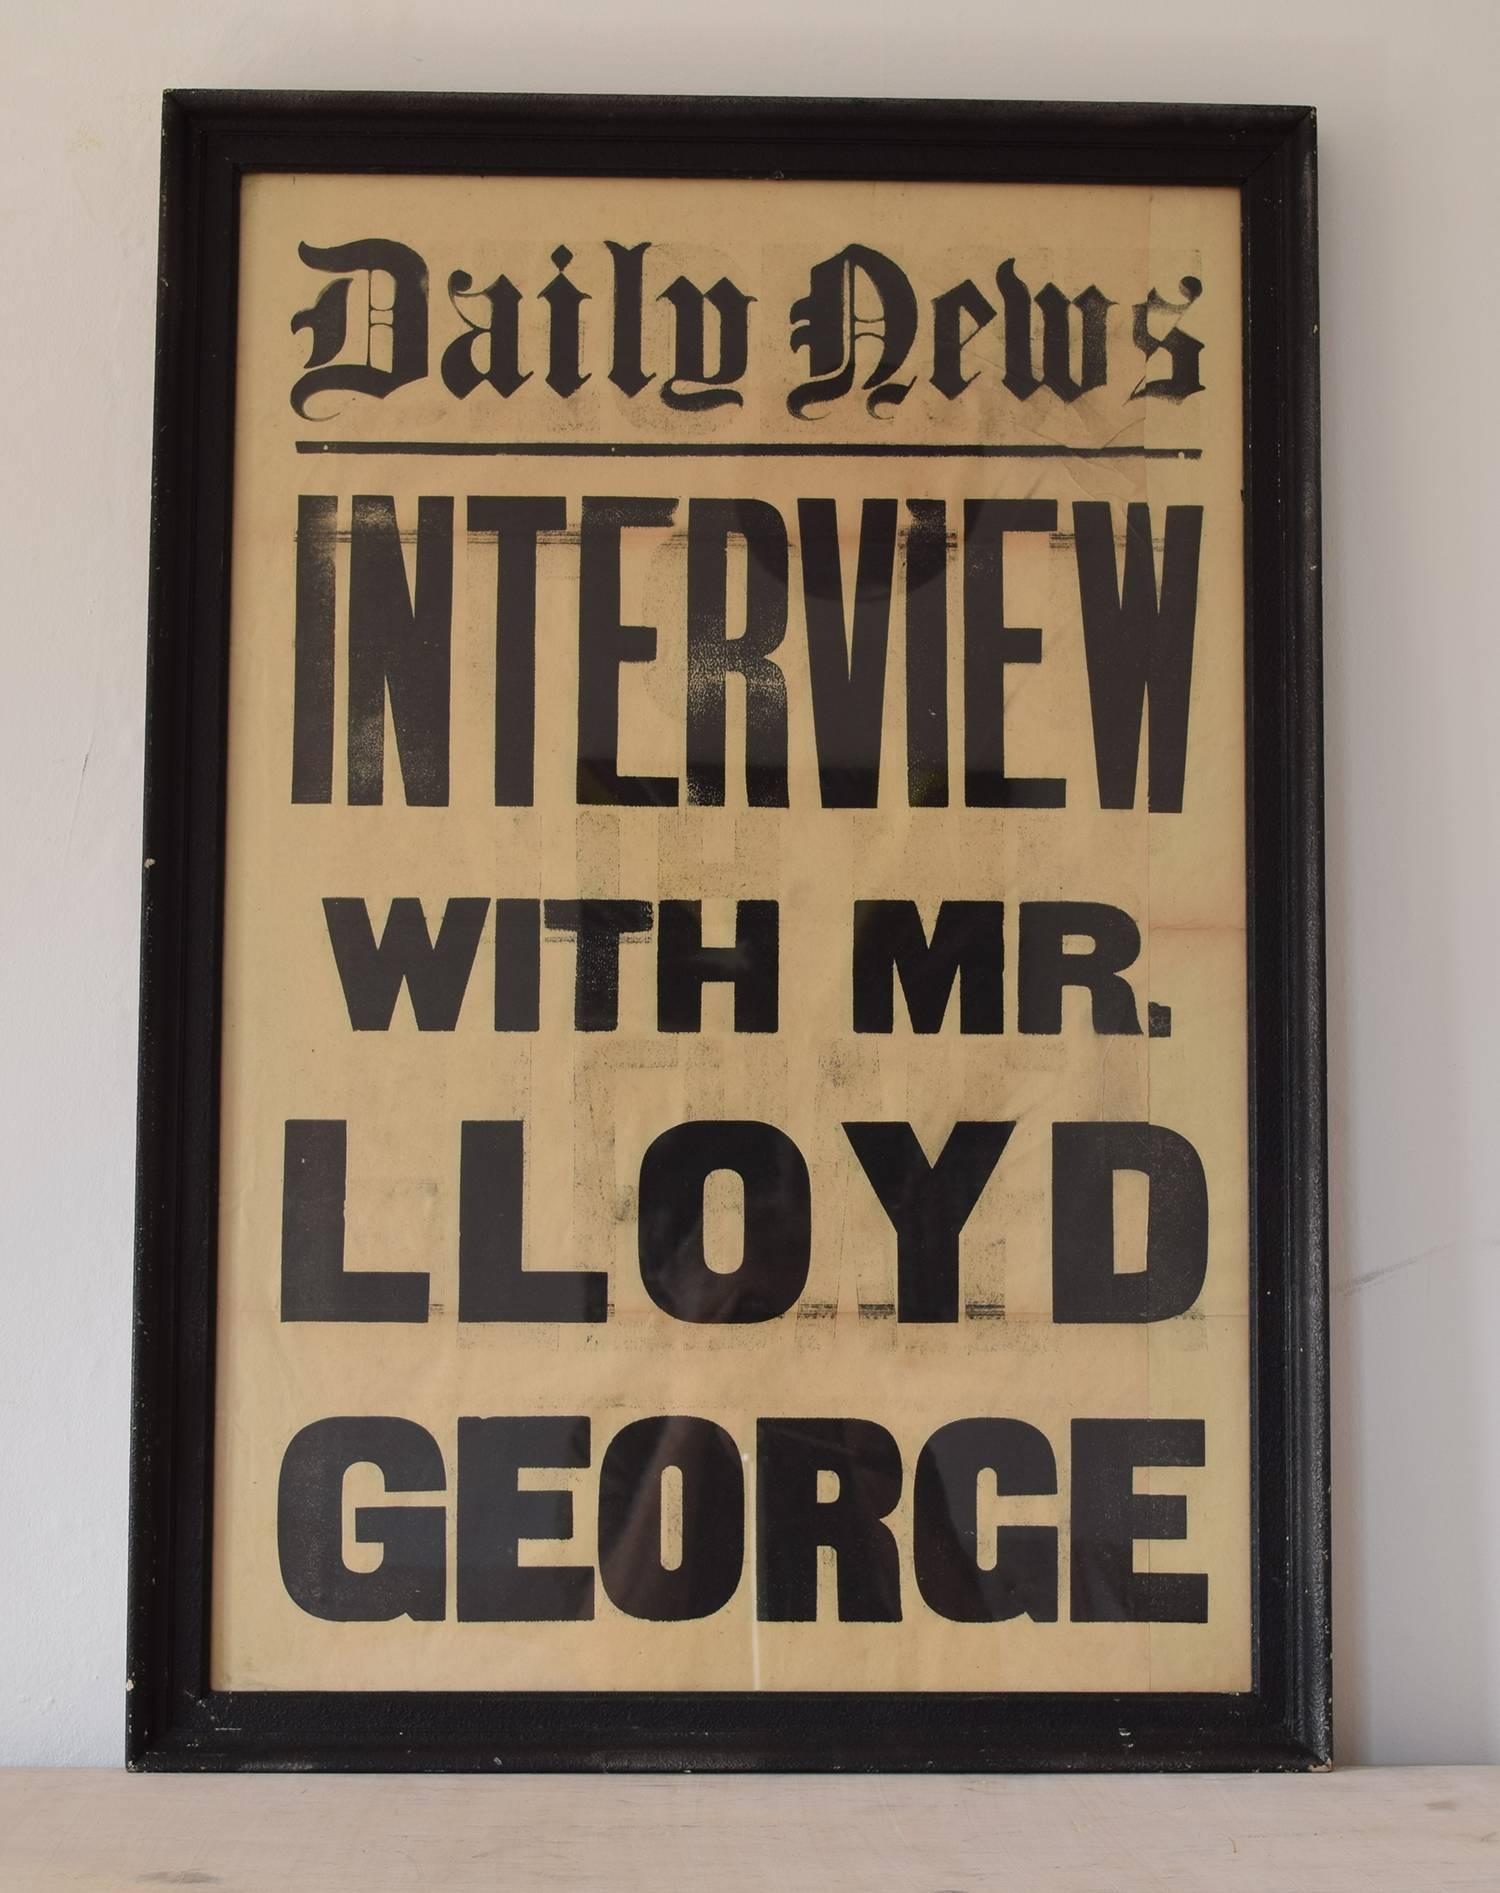 
Amazing piece of art and historical memorabilia.

Originally an advert for a newspaper

Presented in an ebonized frame.